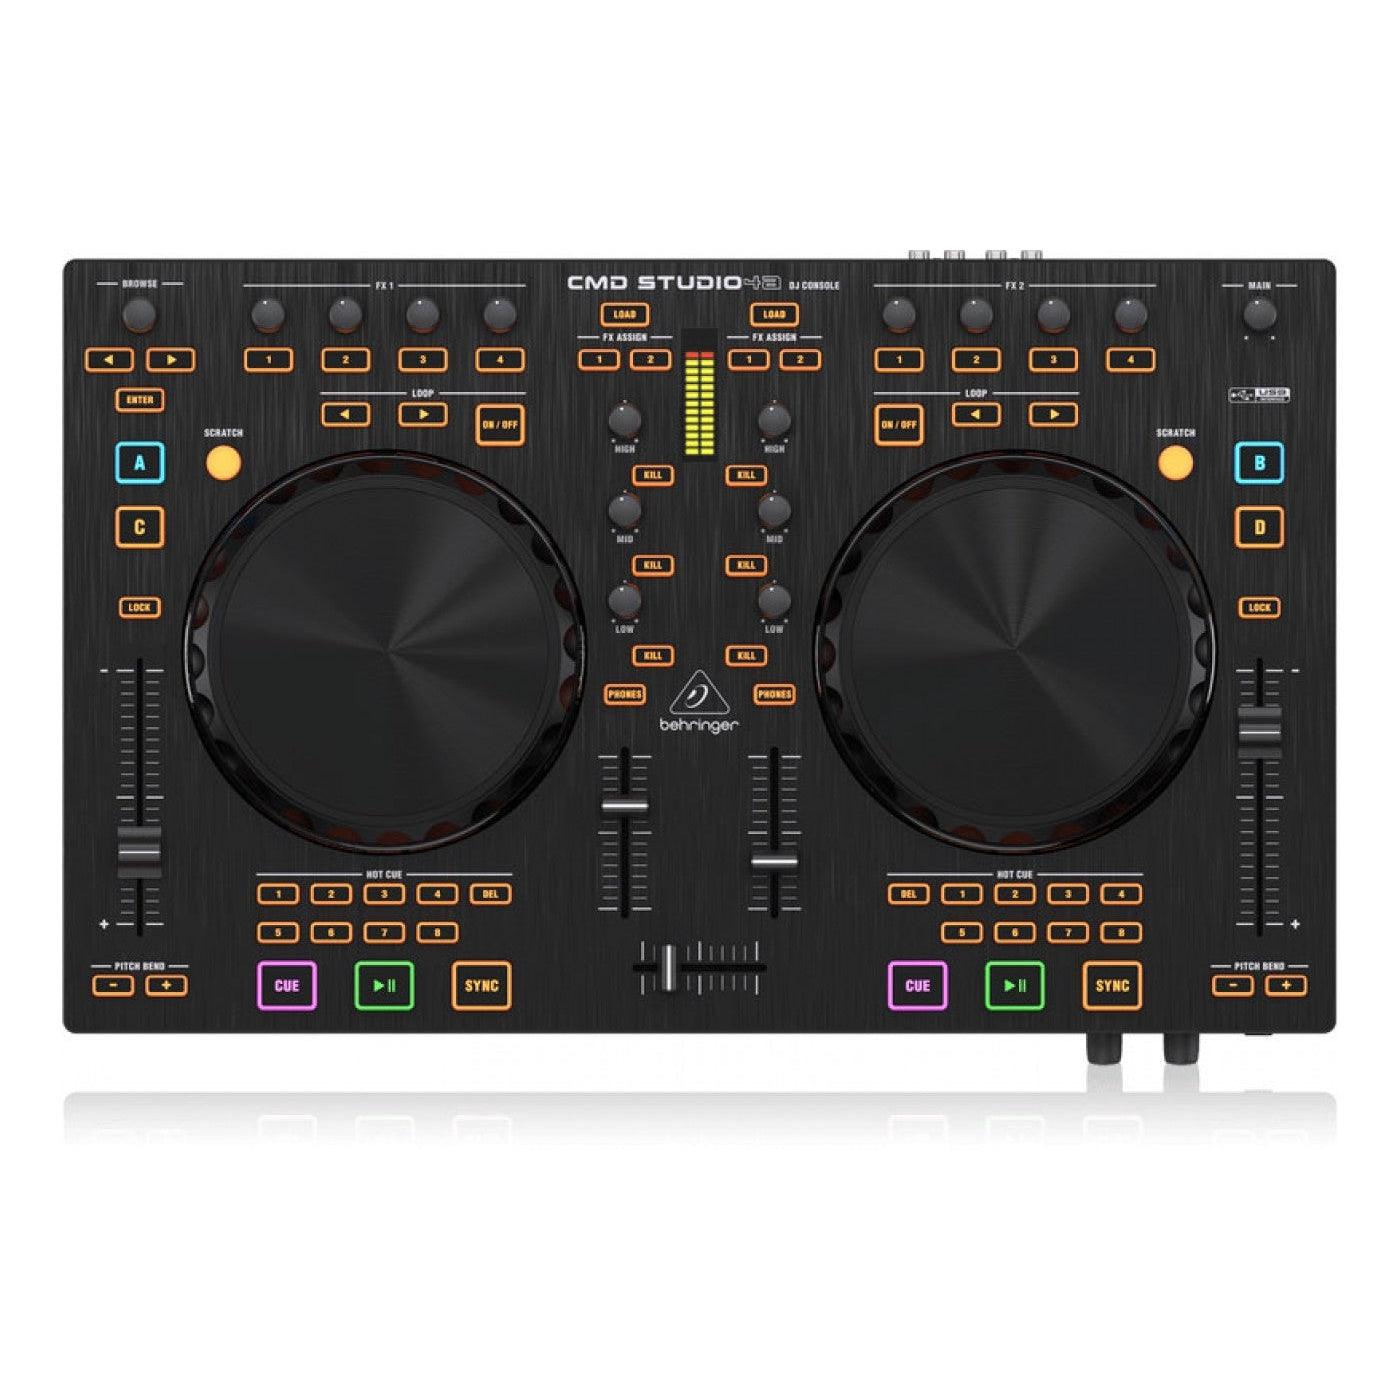 Behringer CMD STUDIO 4A DJ Controller and Audio Interface